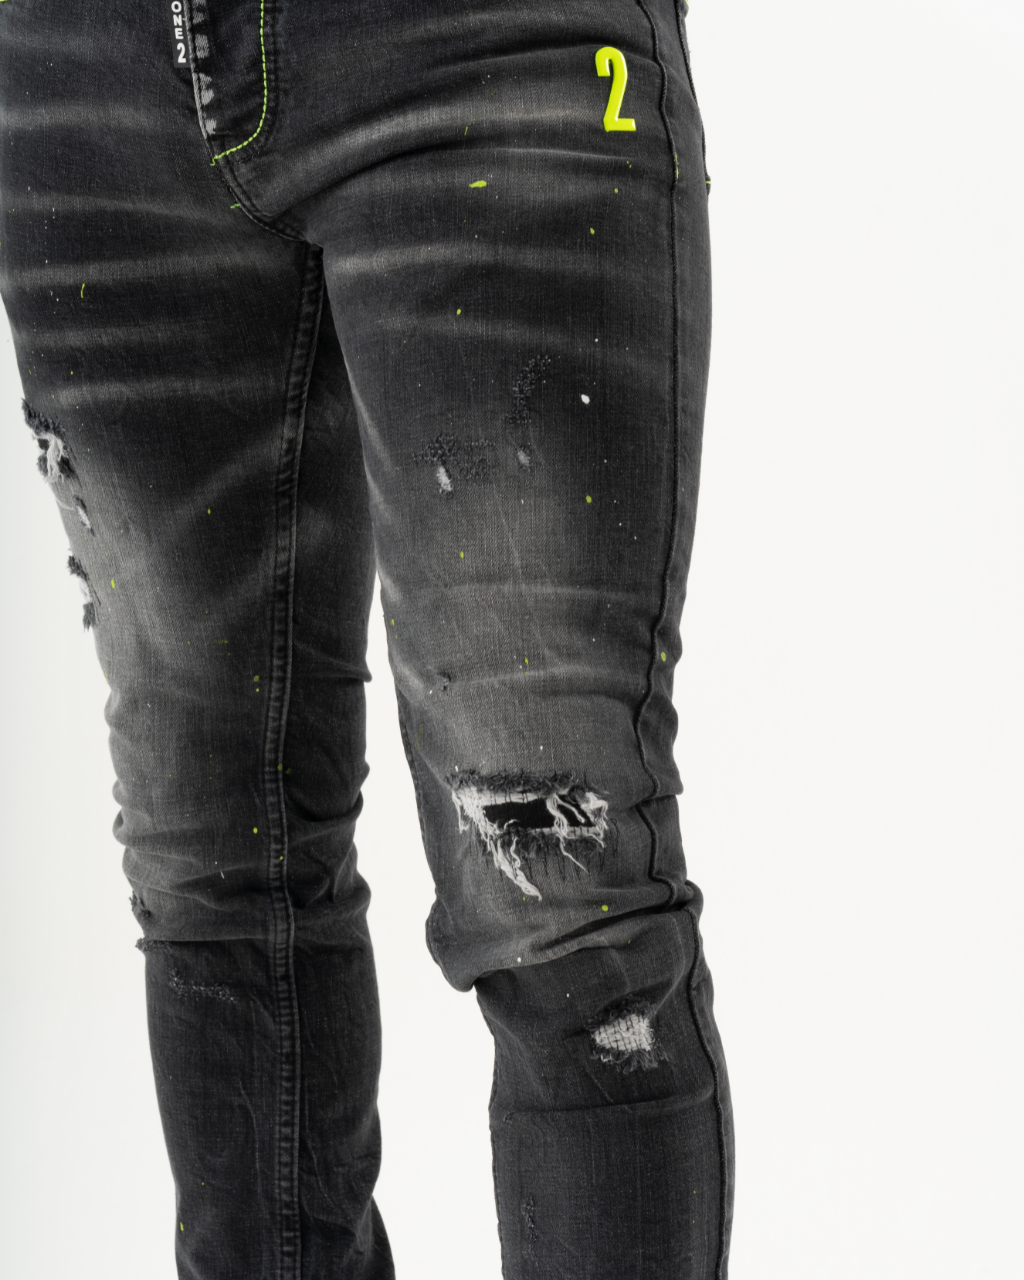 A man wearing INKLING skinny fit jeans with neon paint on them.